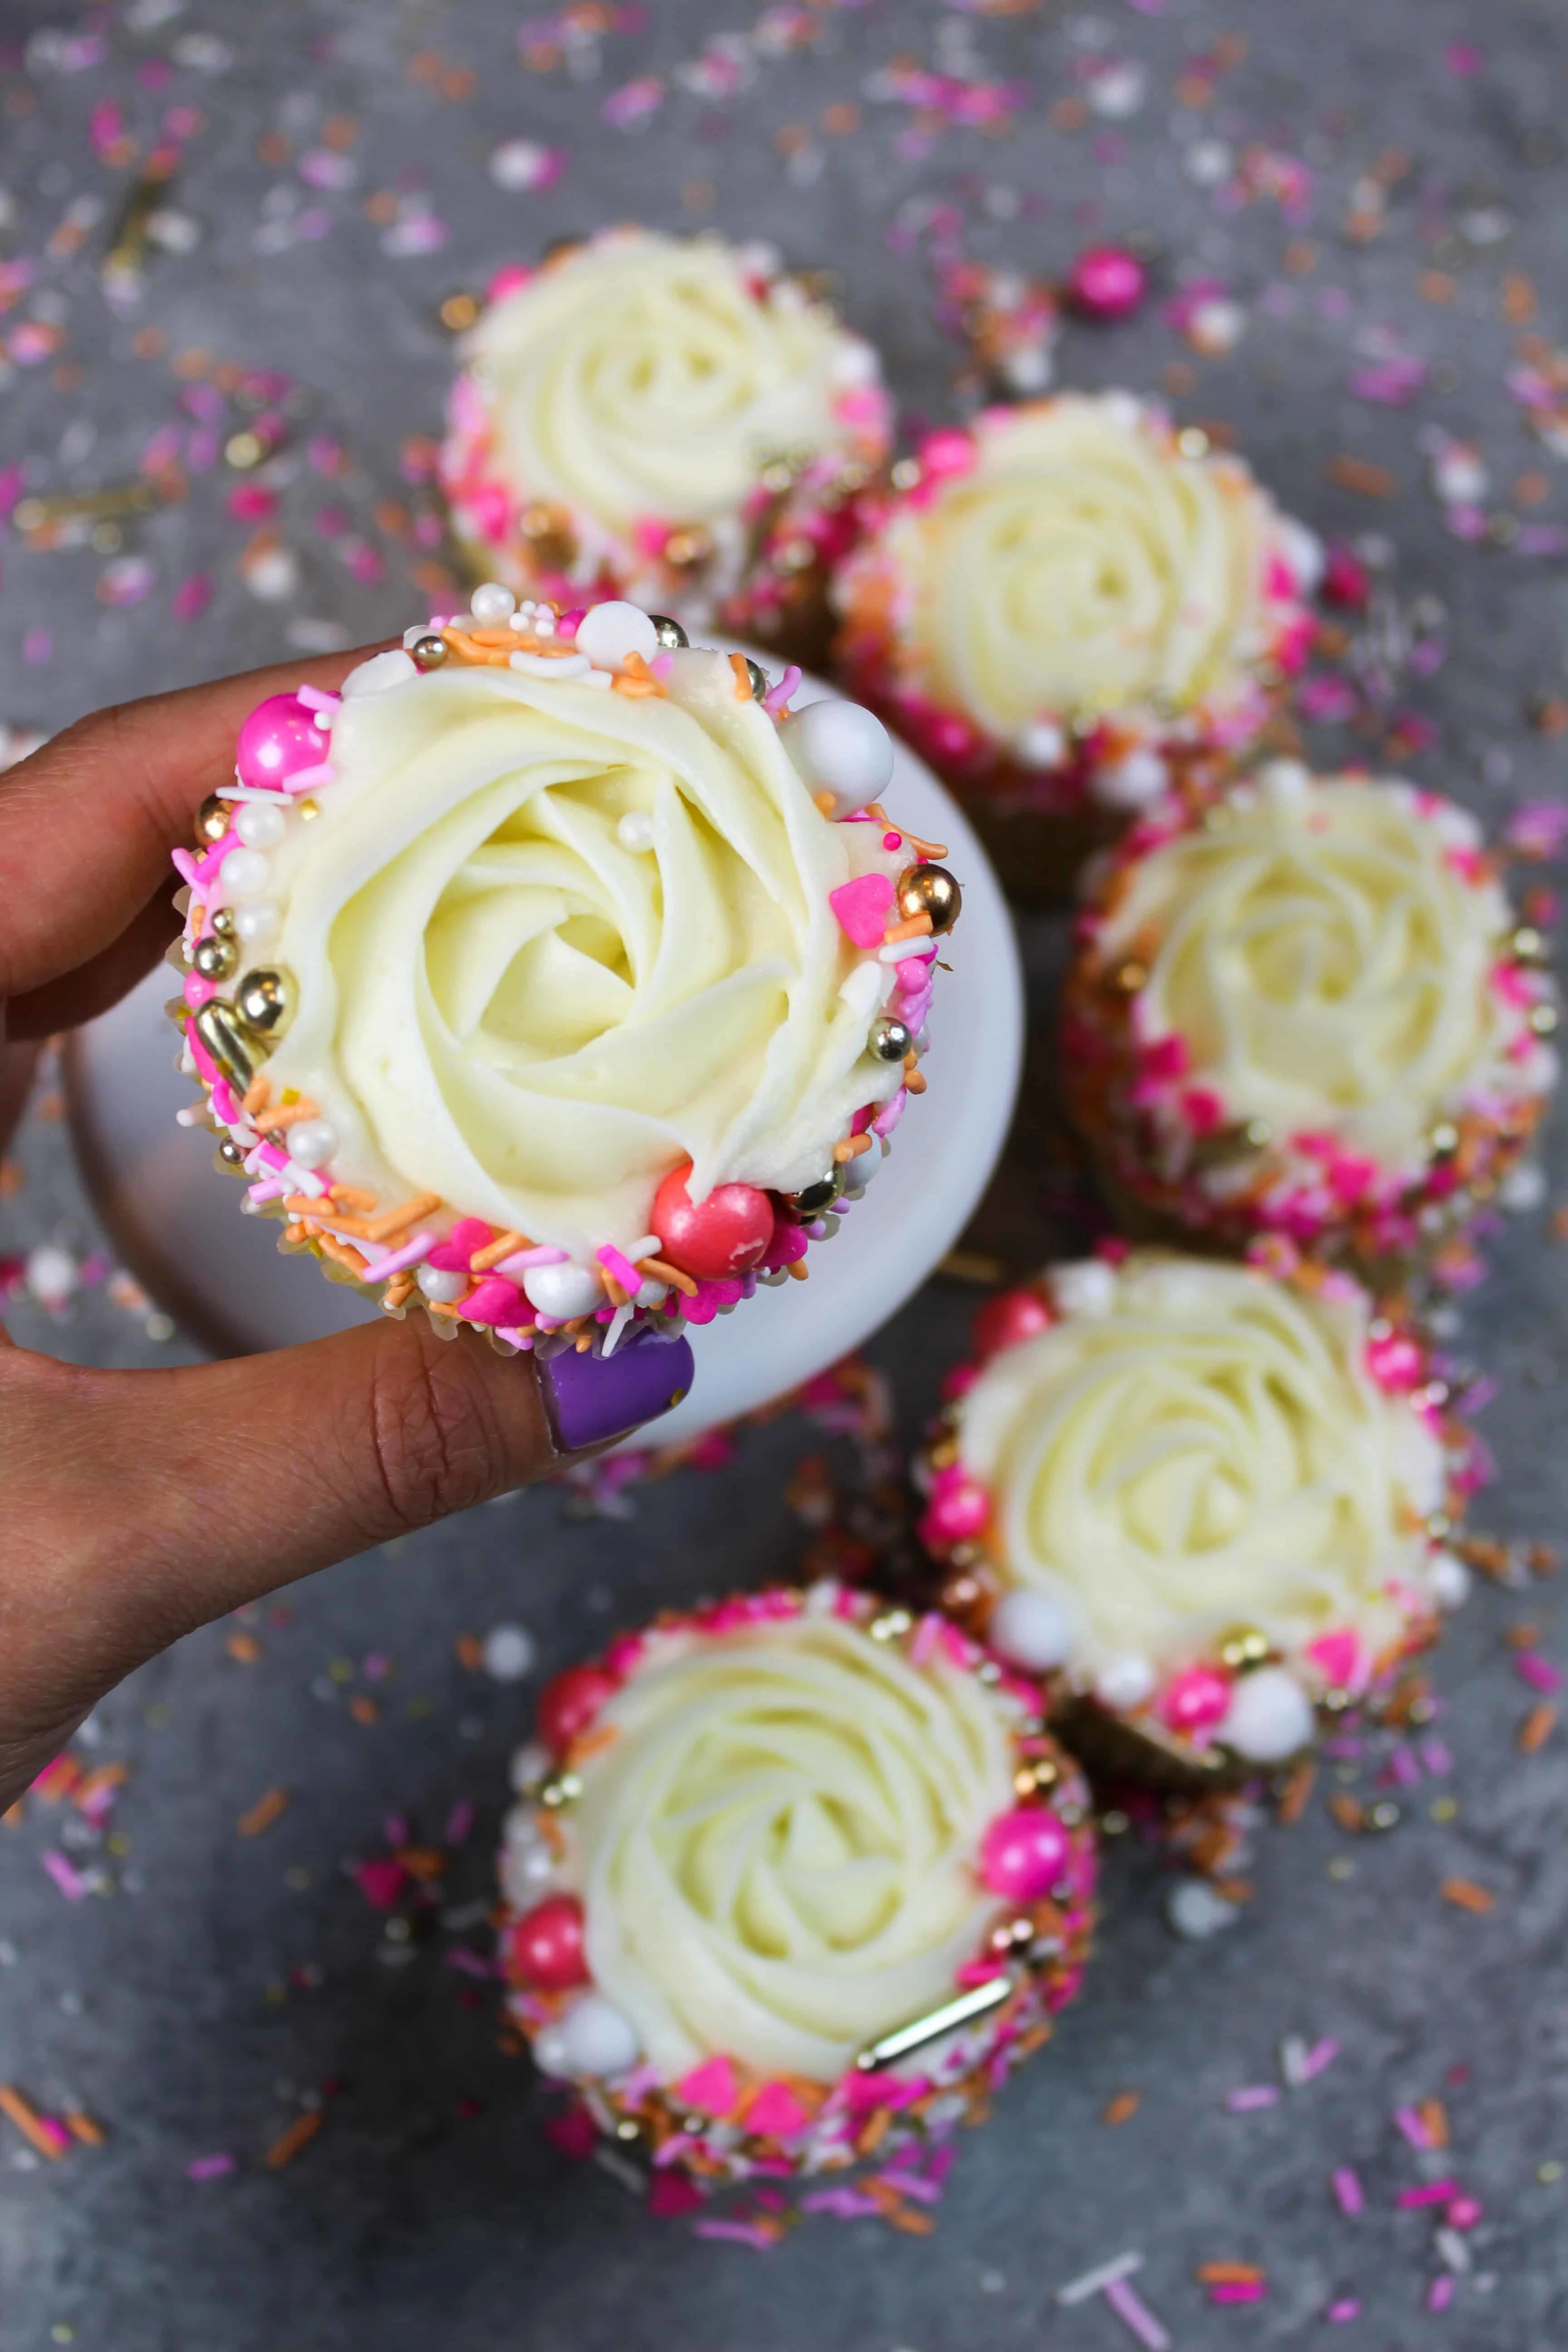 image of cupcakes decorated with buttercream rosettes